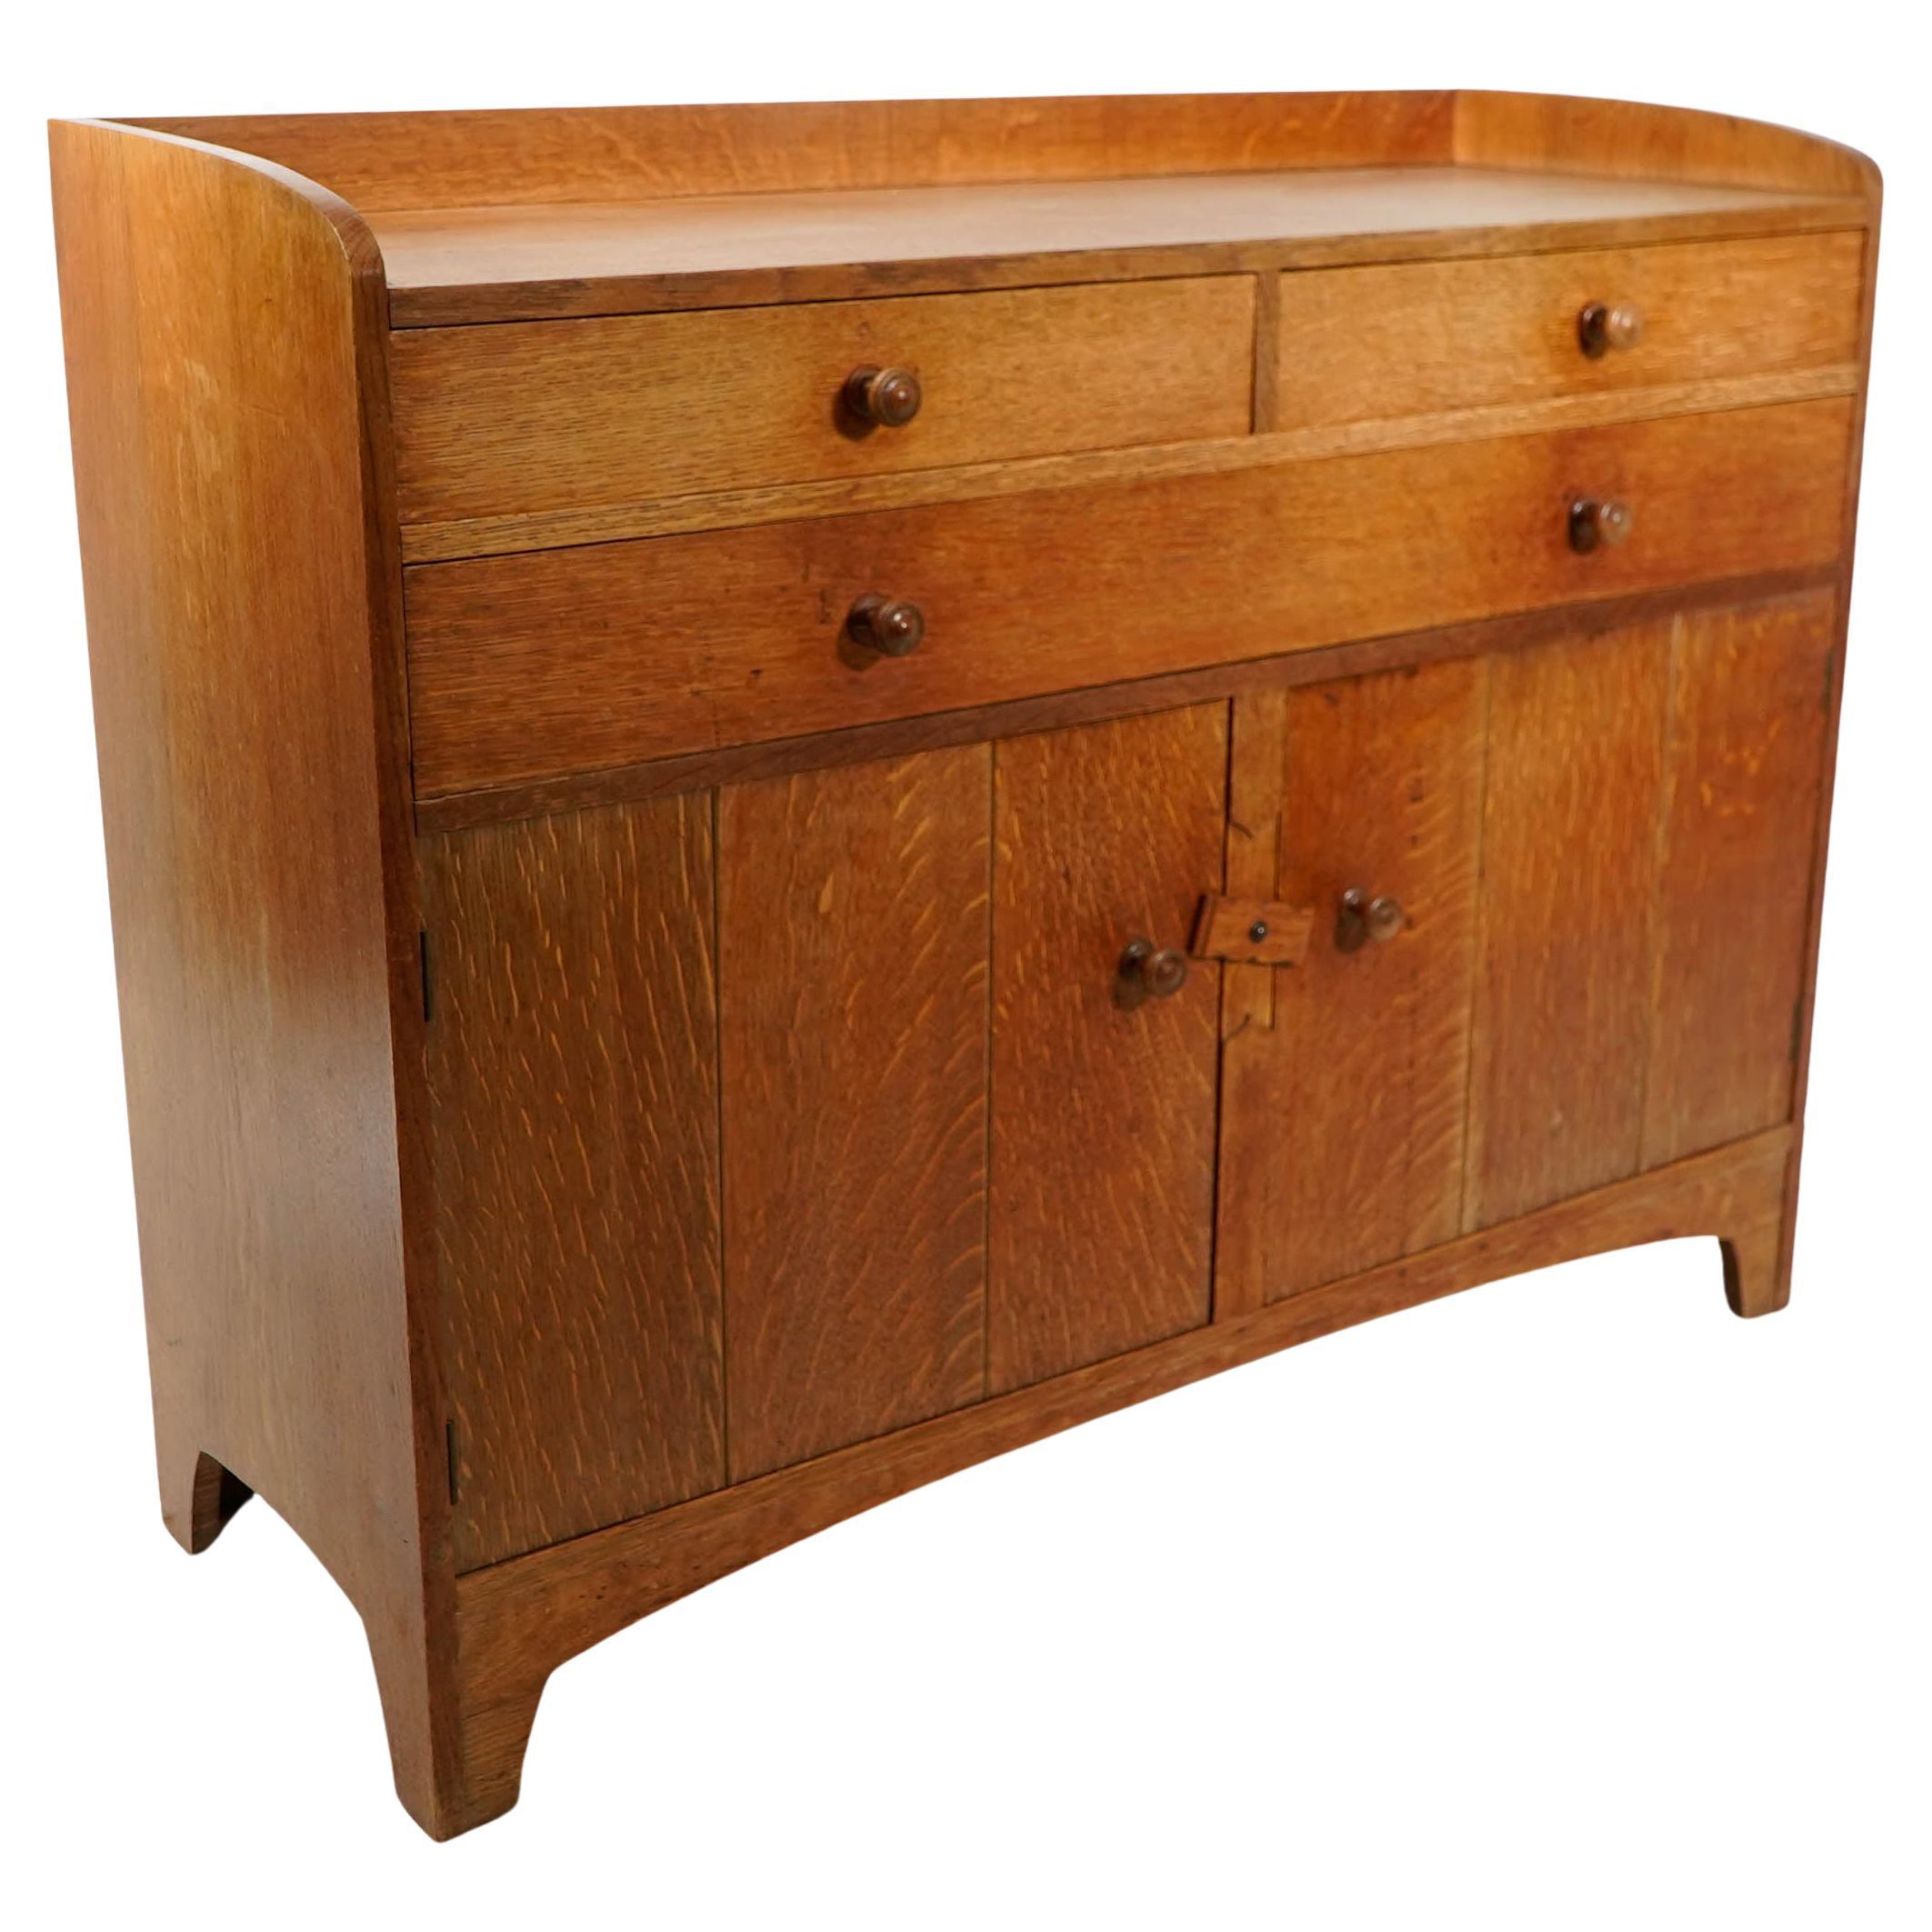 Heal's Sideboards